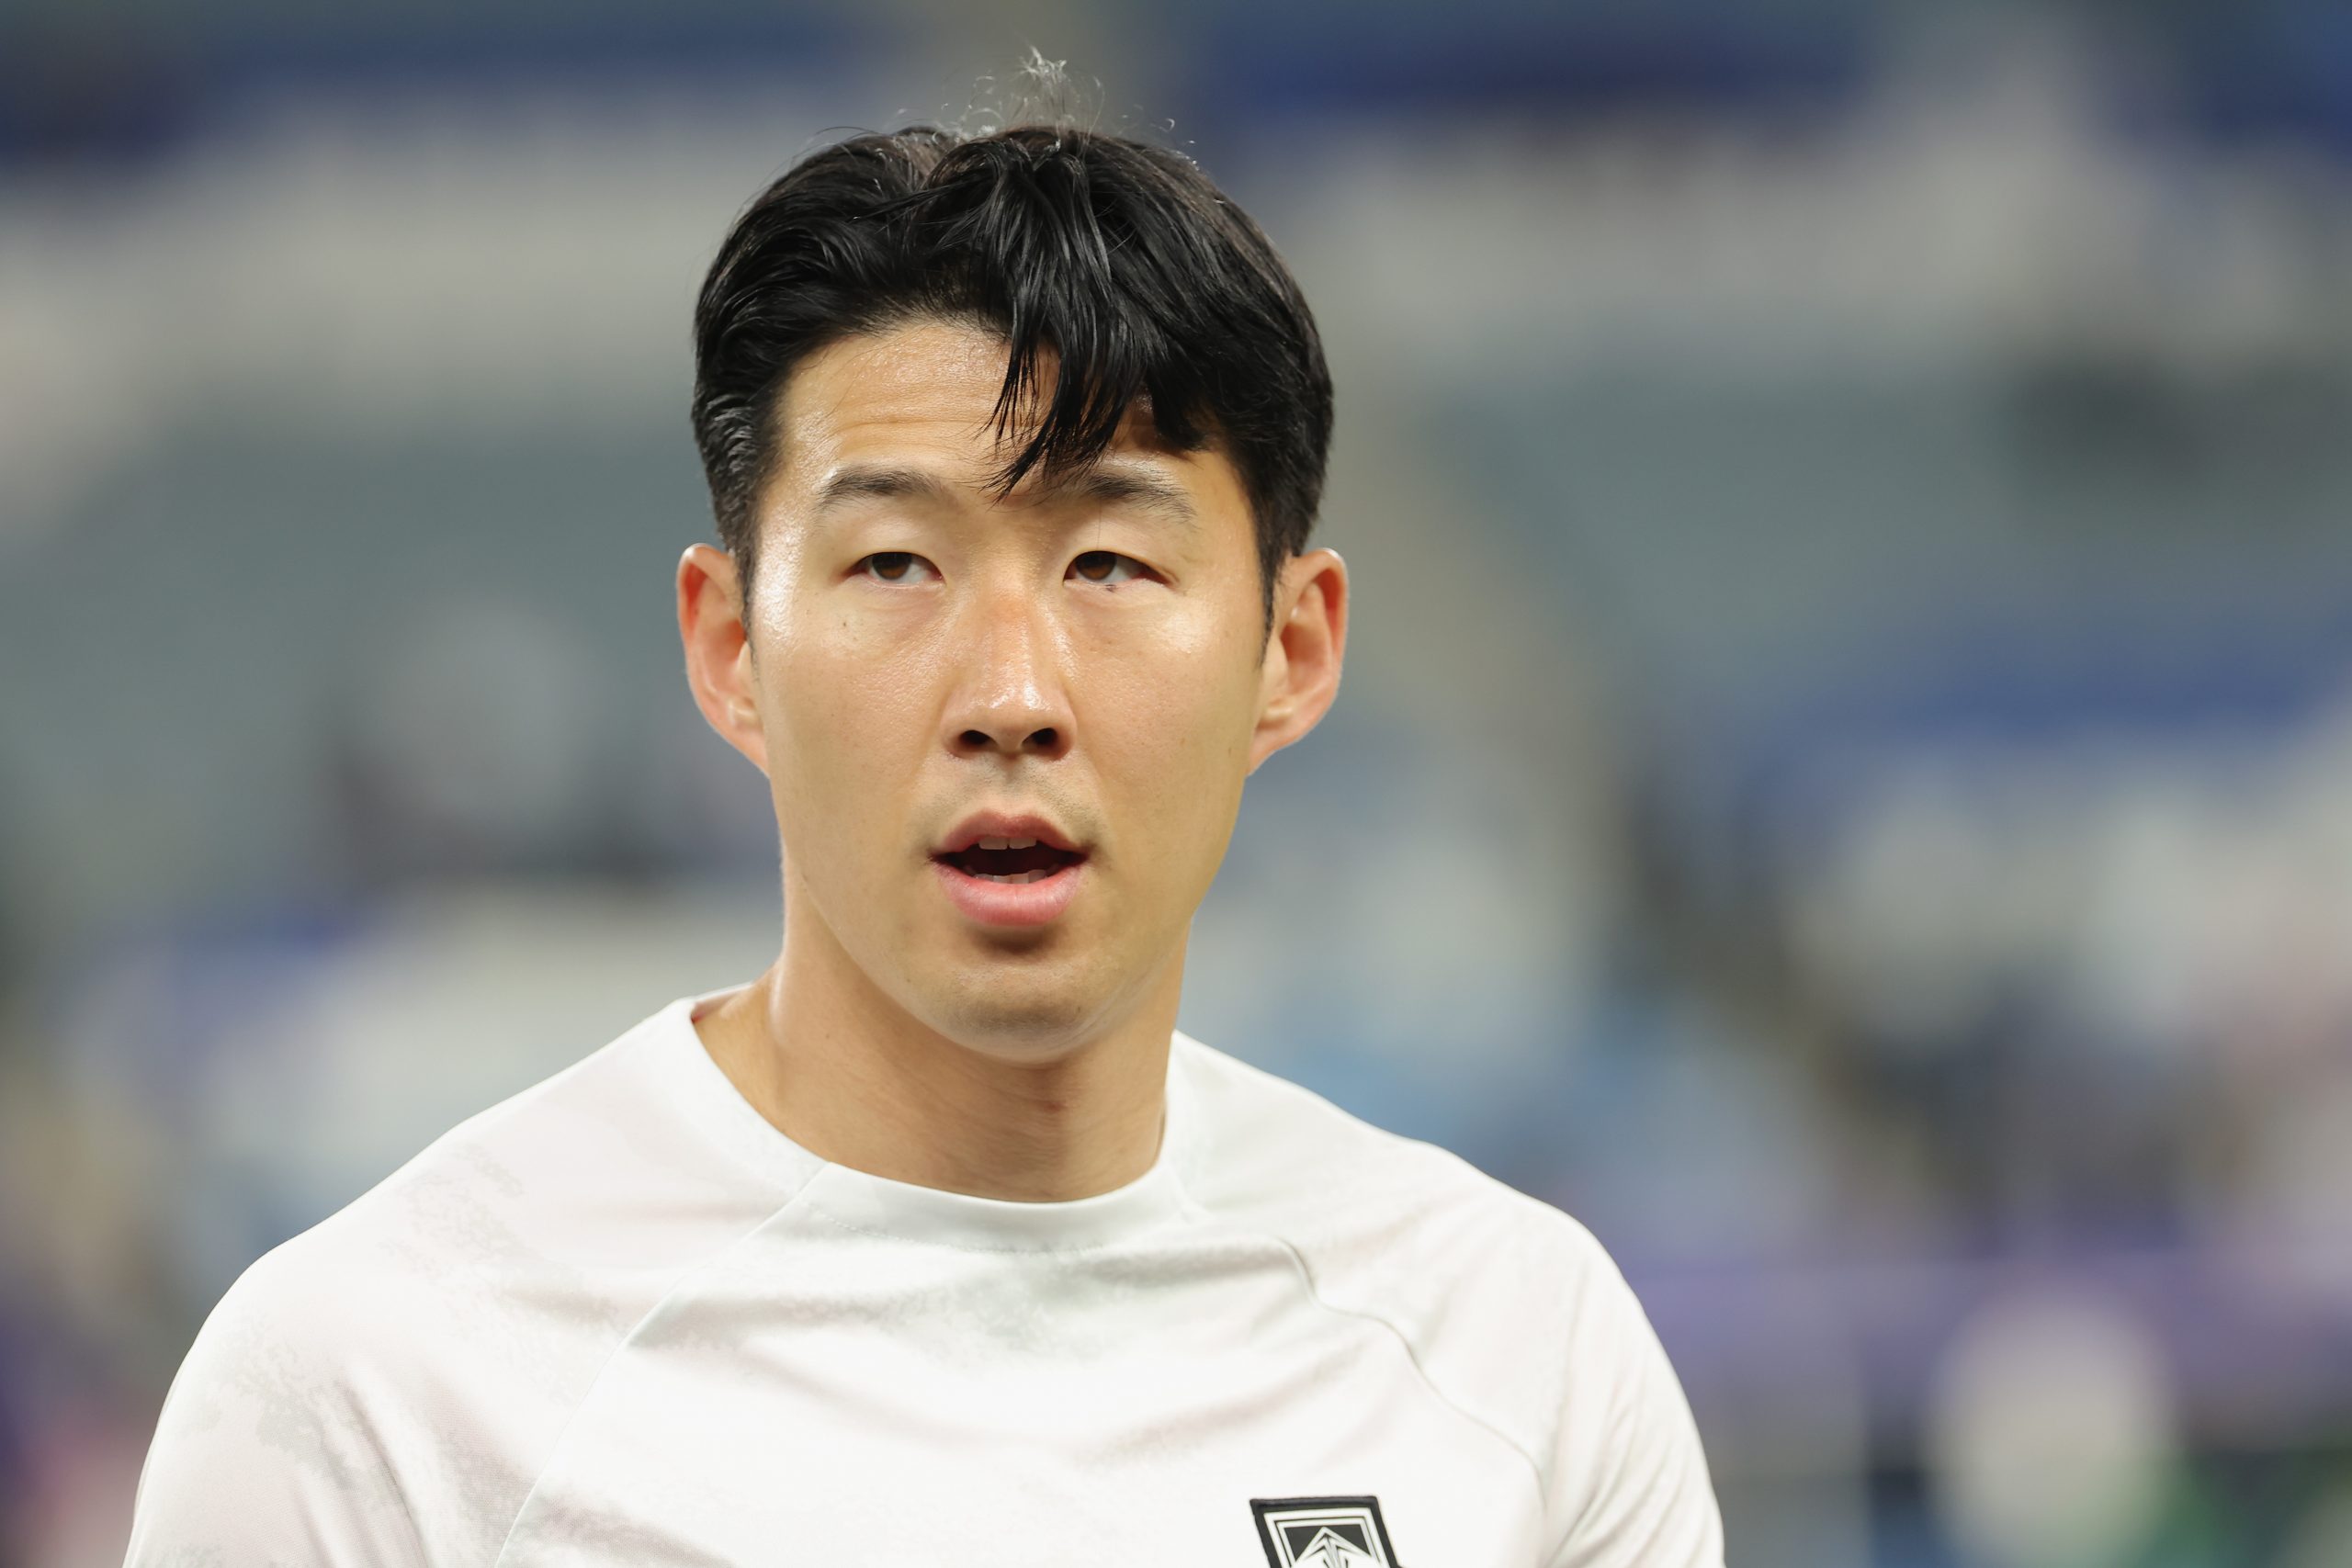 Tottenham star Heung-min Son's Instagram post puts an end to the rumours around the 'table tennis' incident.